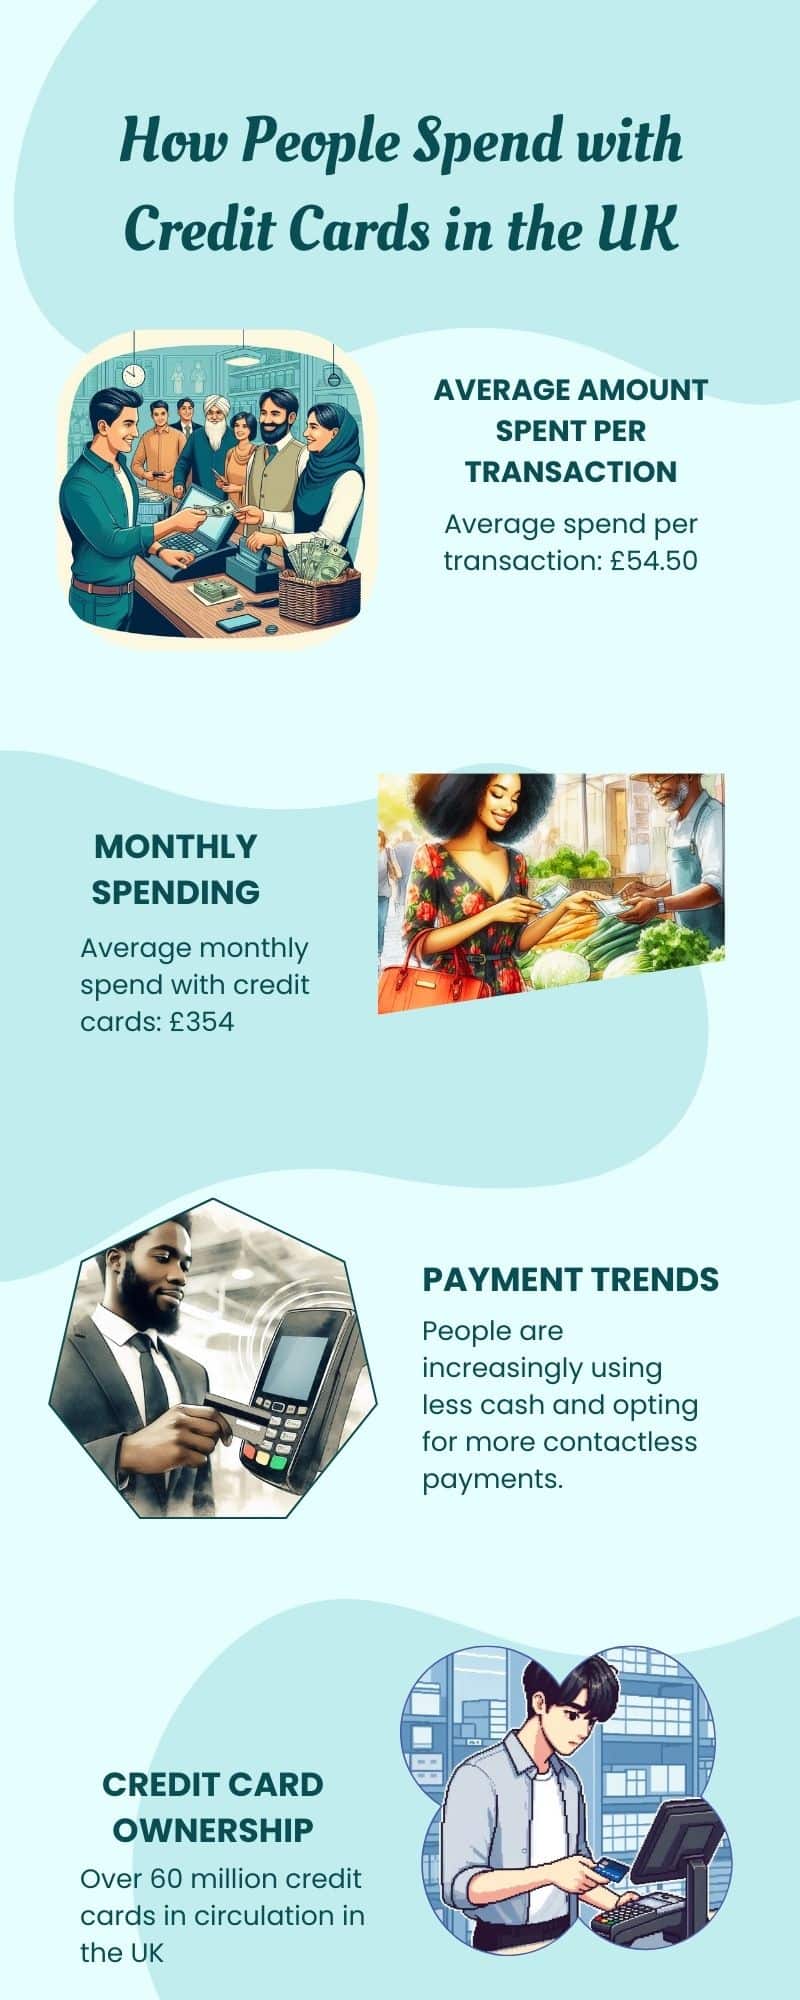 How People Spend with Credit Cards in the UK